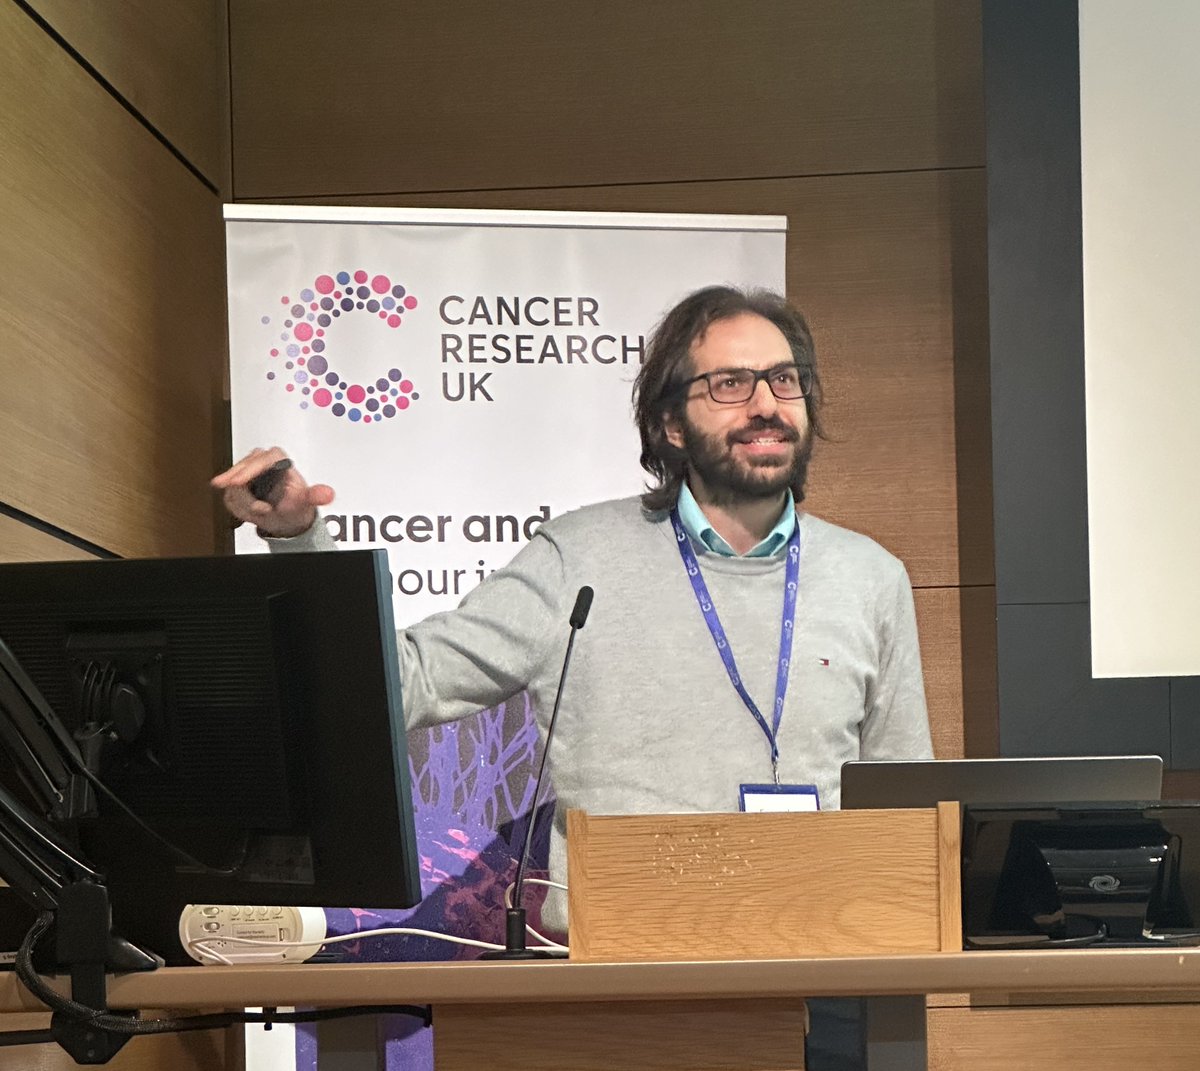 Evangelos Giampazolias seeks to understand the signals that make cancer a visible threat to the immune system so is decoding the host-microbiome interactions that regulate cancer immunity. (NC) #CancerHostTI24 @CRUK_MI